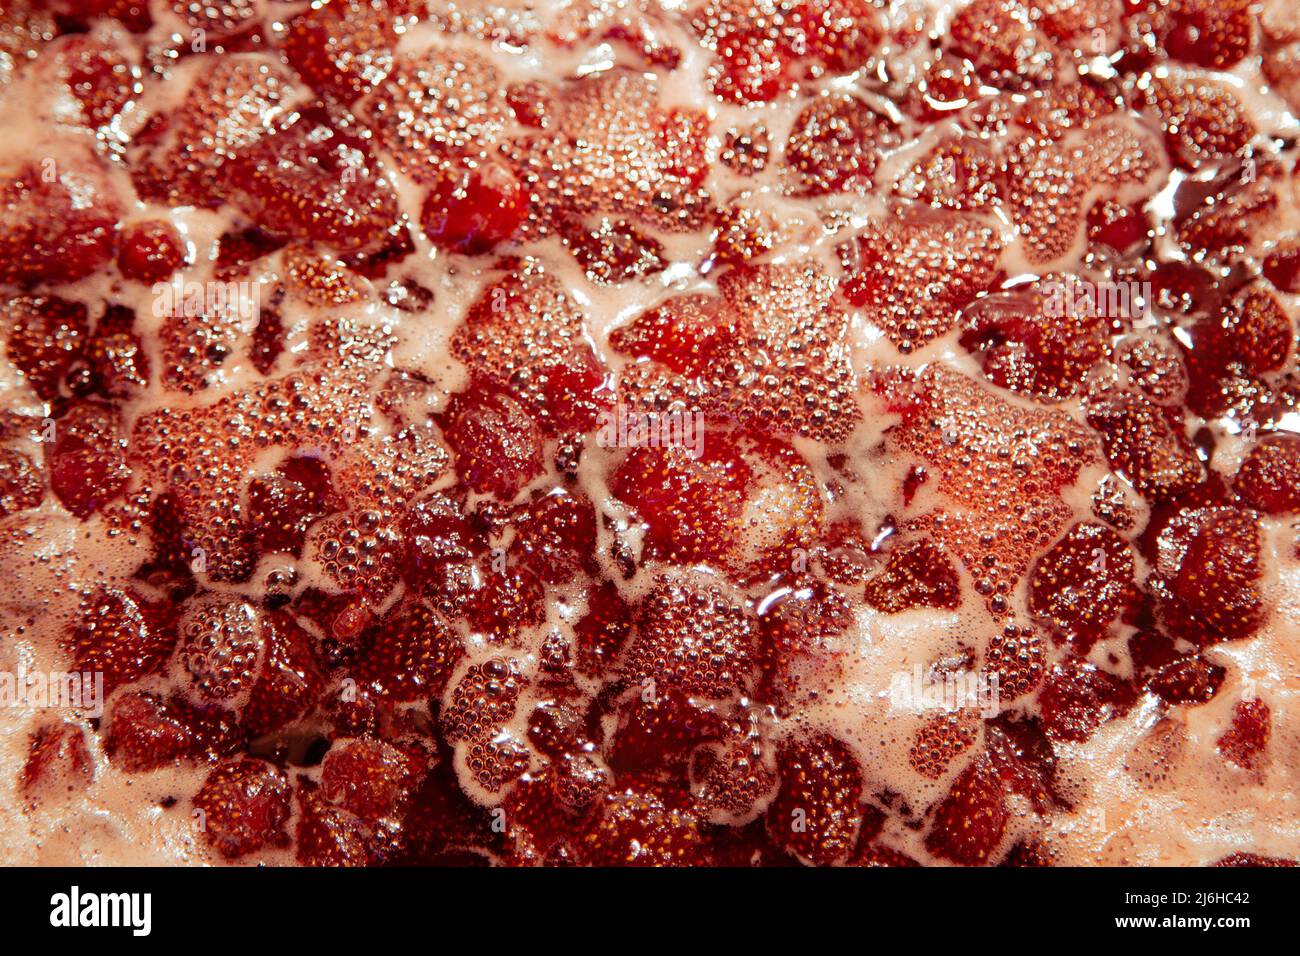 Strawberry jam is boiling, detailed shooting. Close-up of strawberry jelly boiling in a saucepan. Preparation of strawberry jelly, marmalade or strawberry sauce. Stock Photo